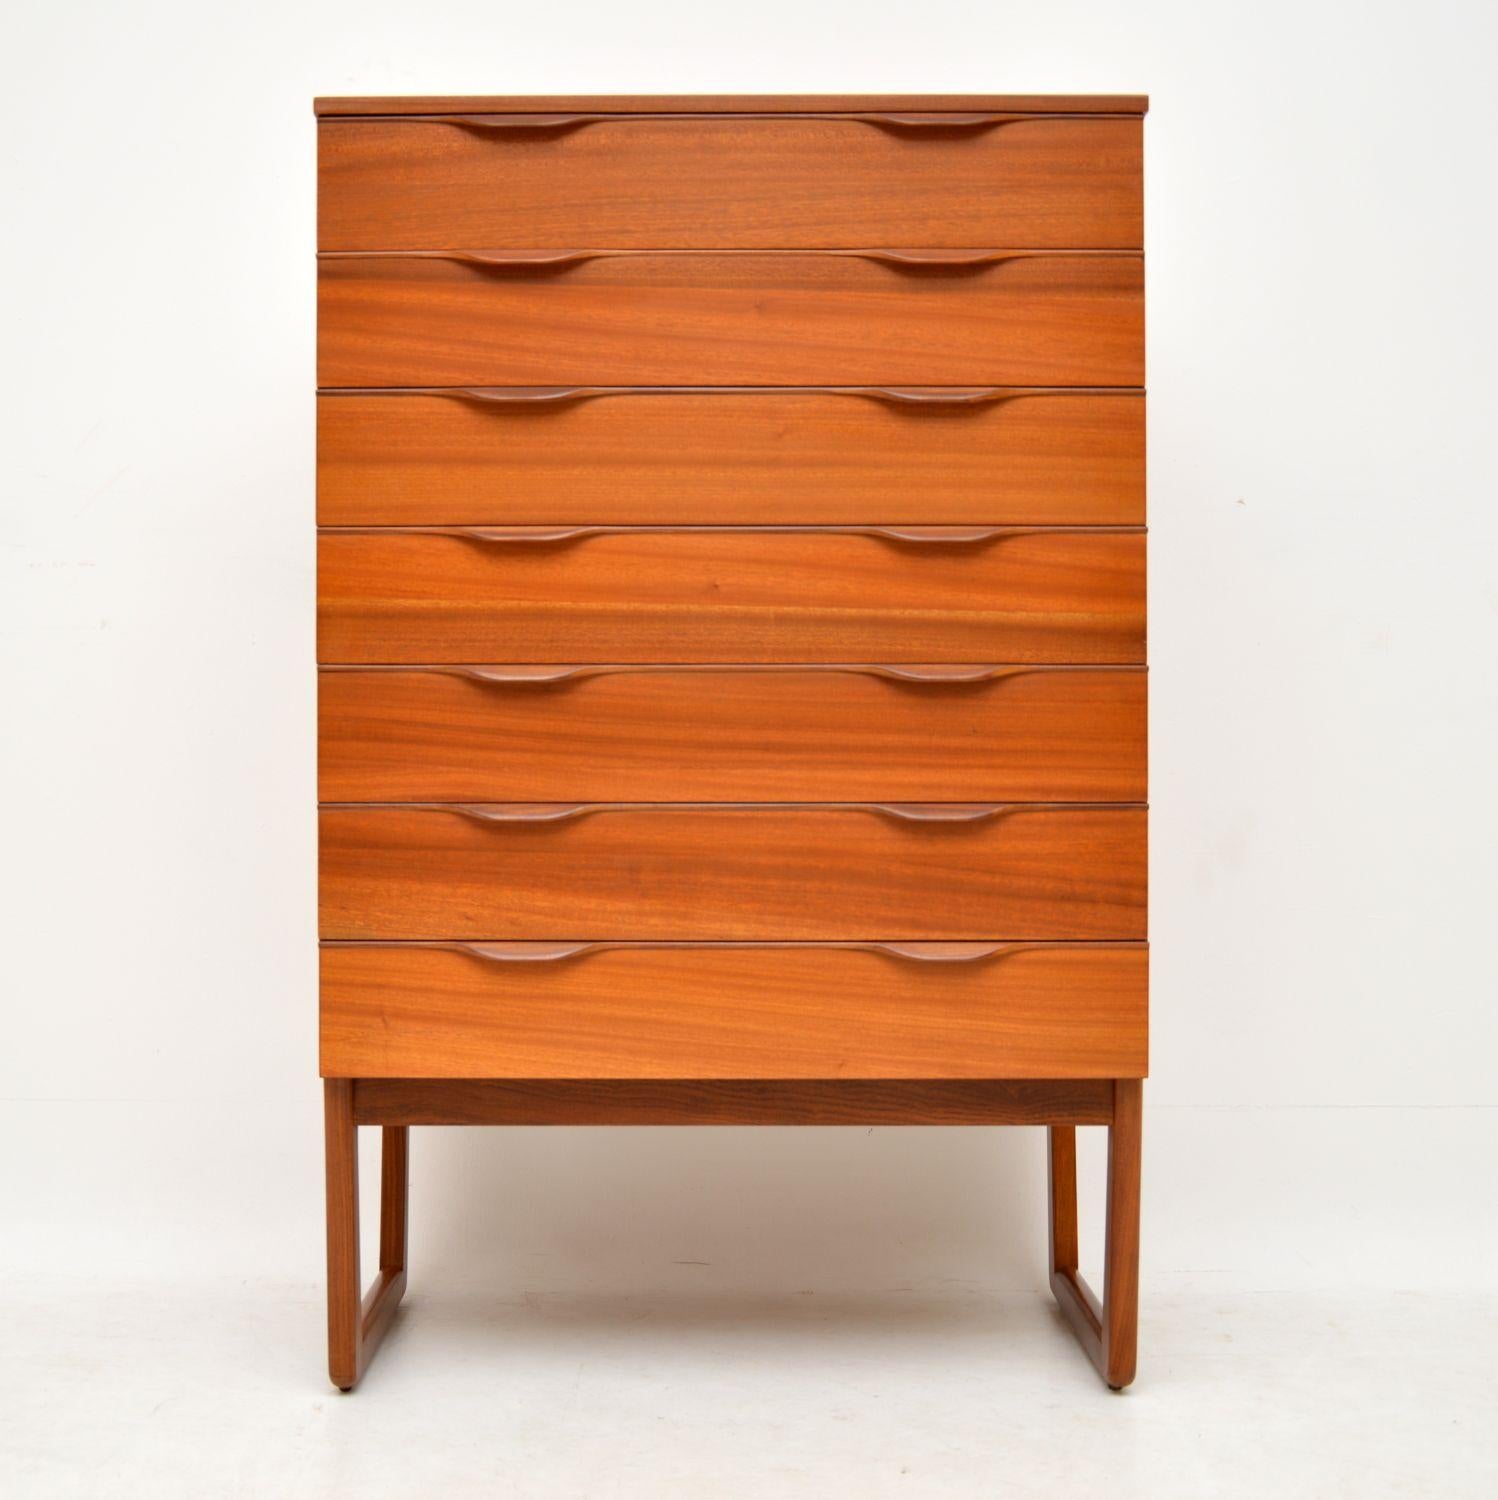 A stylish and very well made chest of drawers in teak, this dates from the 1960s. It has a beautiful design, with lots of storage space, the legs are detachable for ease of transport. We have had this completely stripped and re-polished to a very